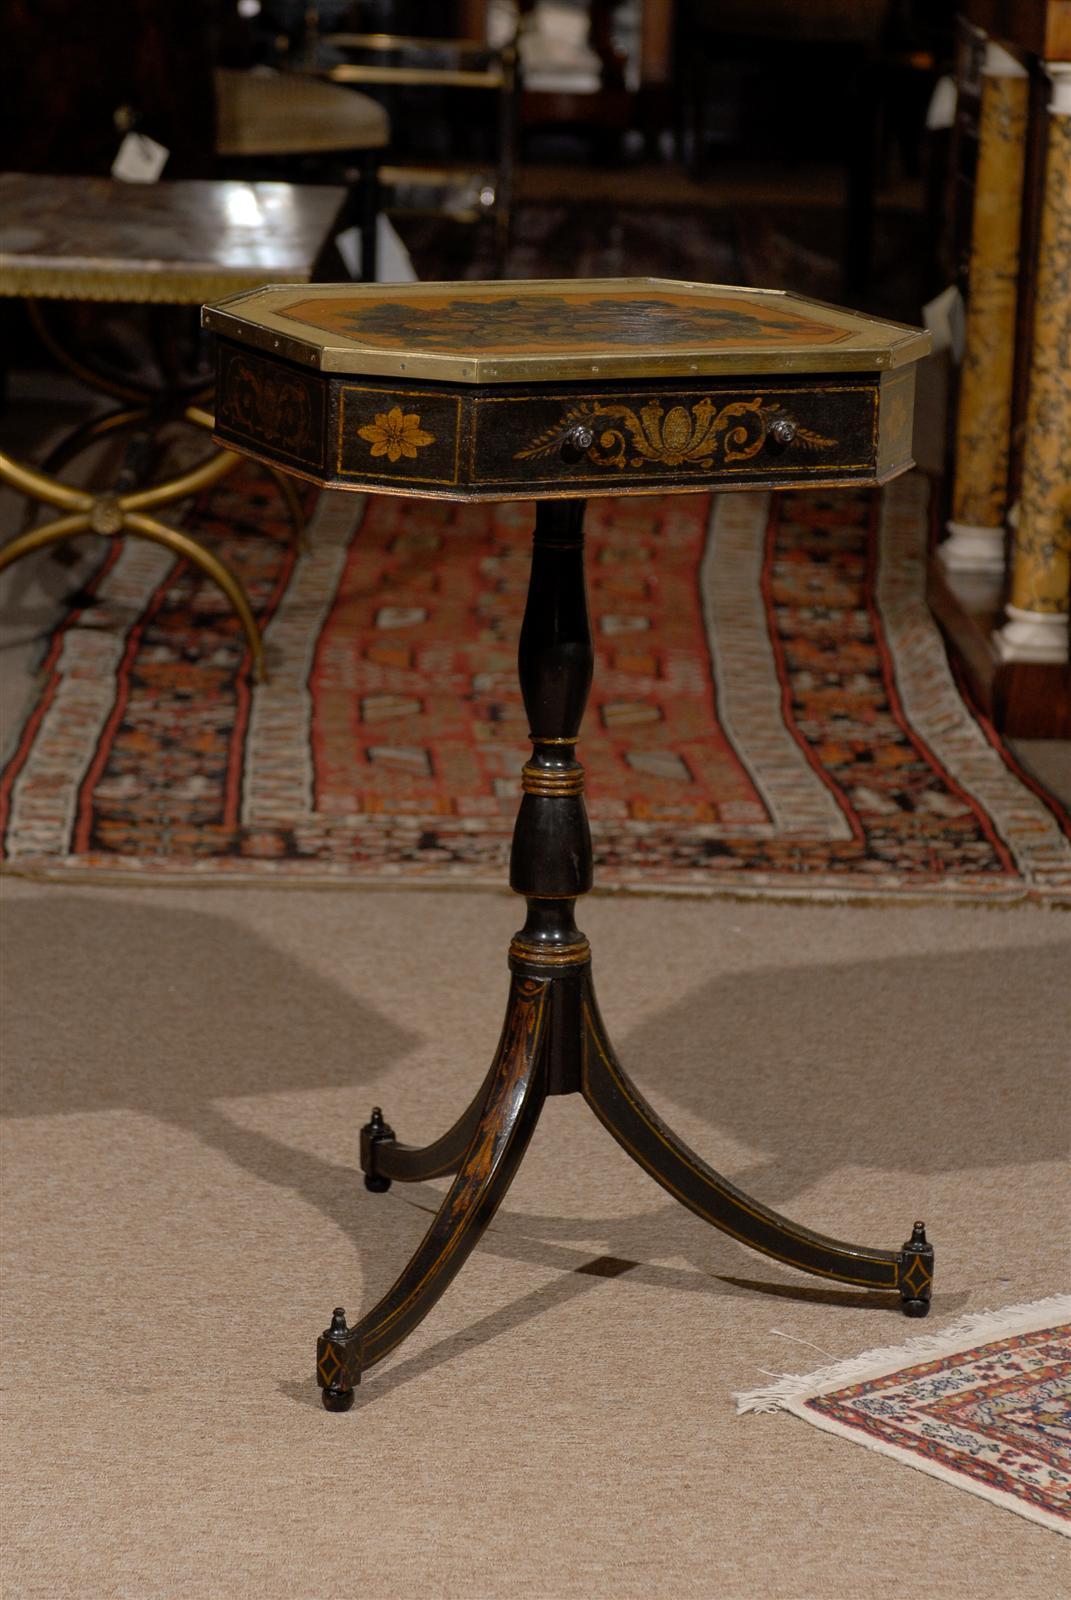 19th Century Regency Style Side Table with Decoupage Floral Decorated Top